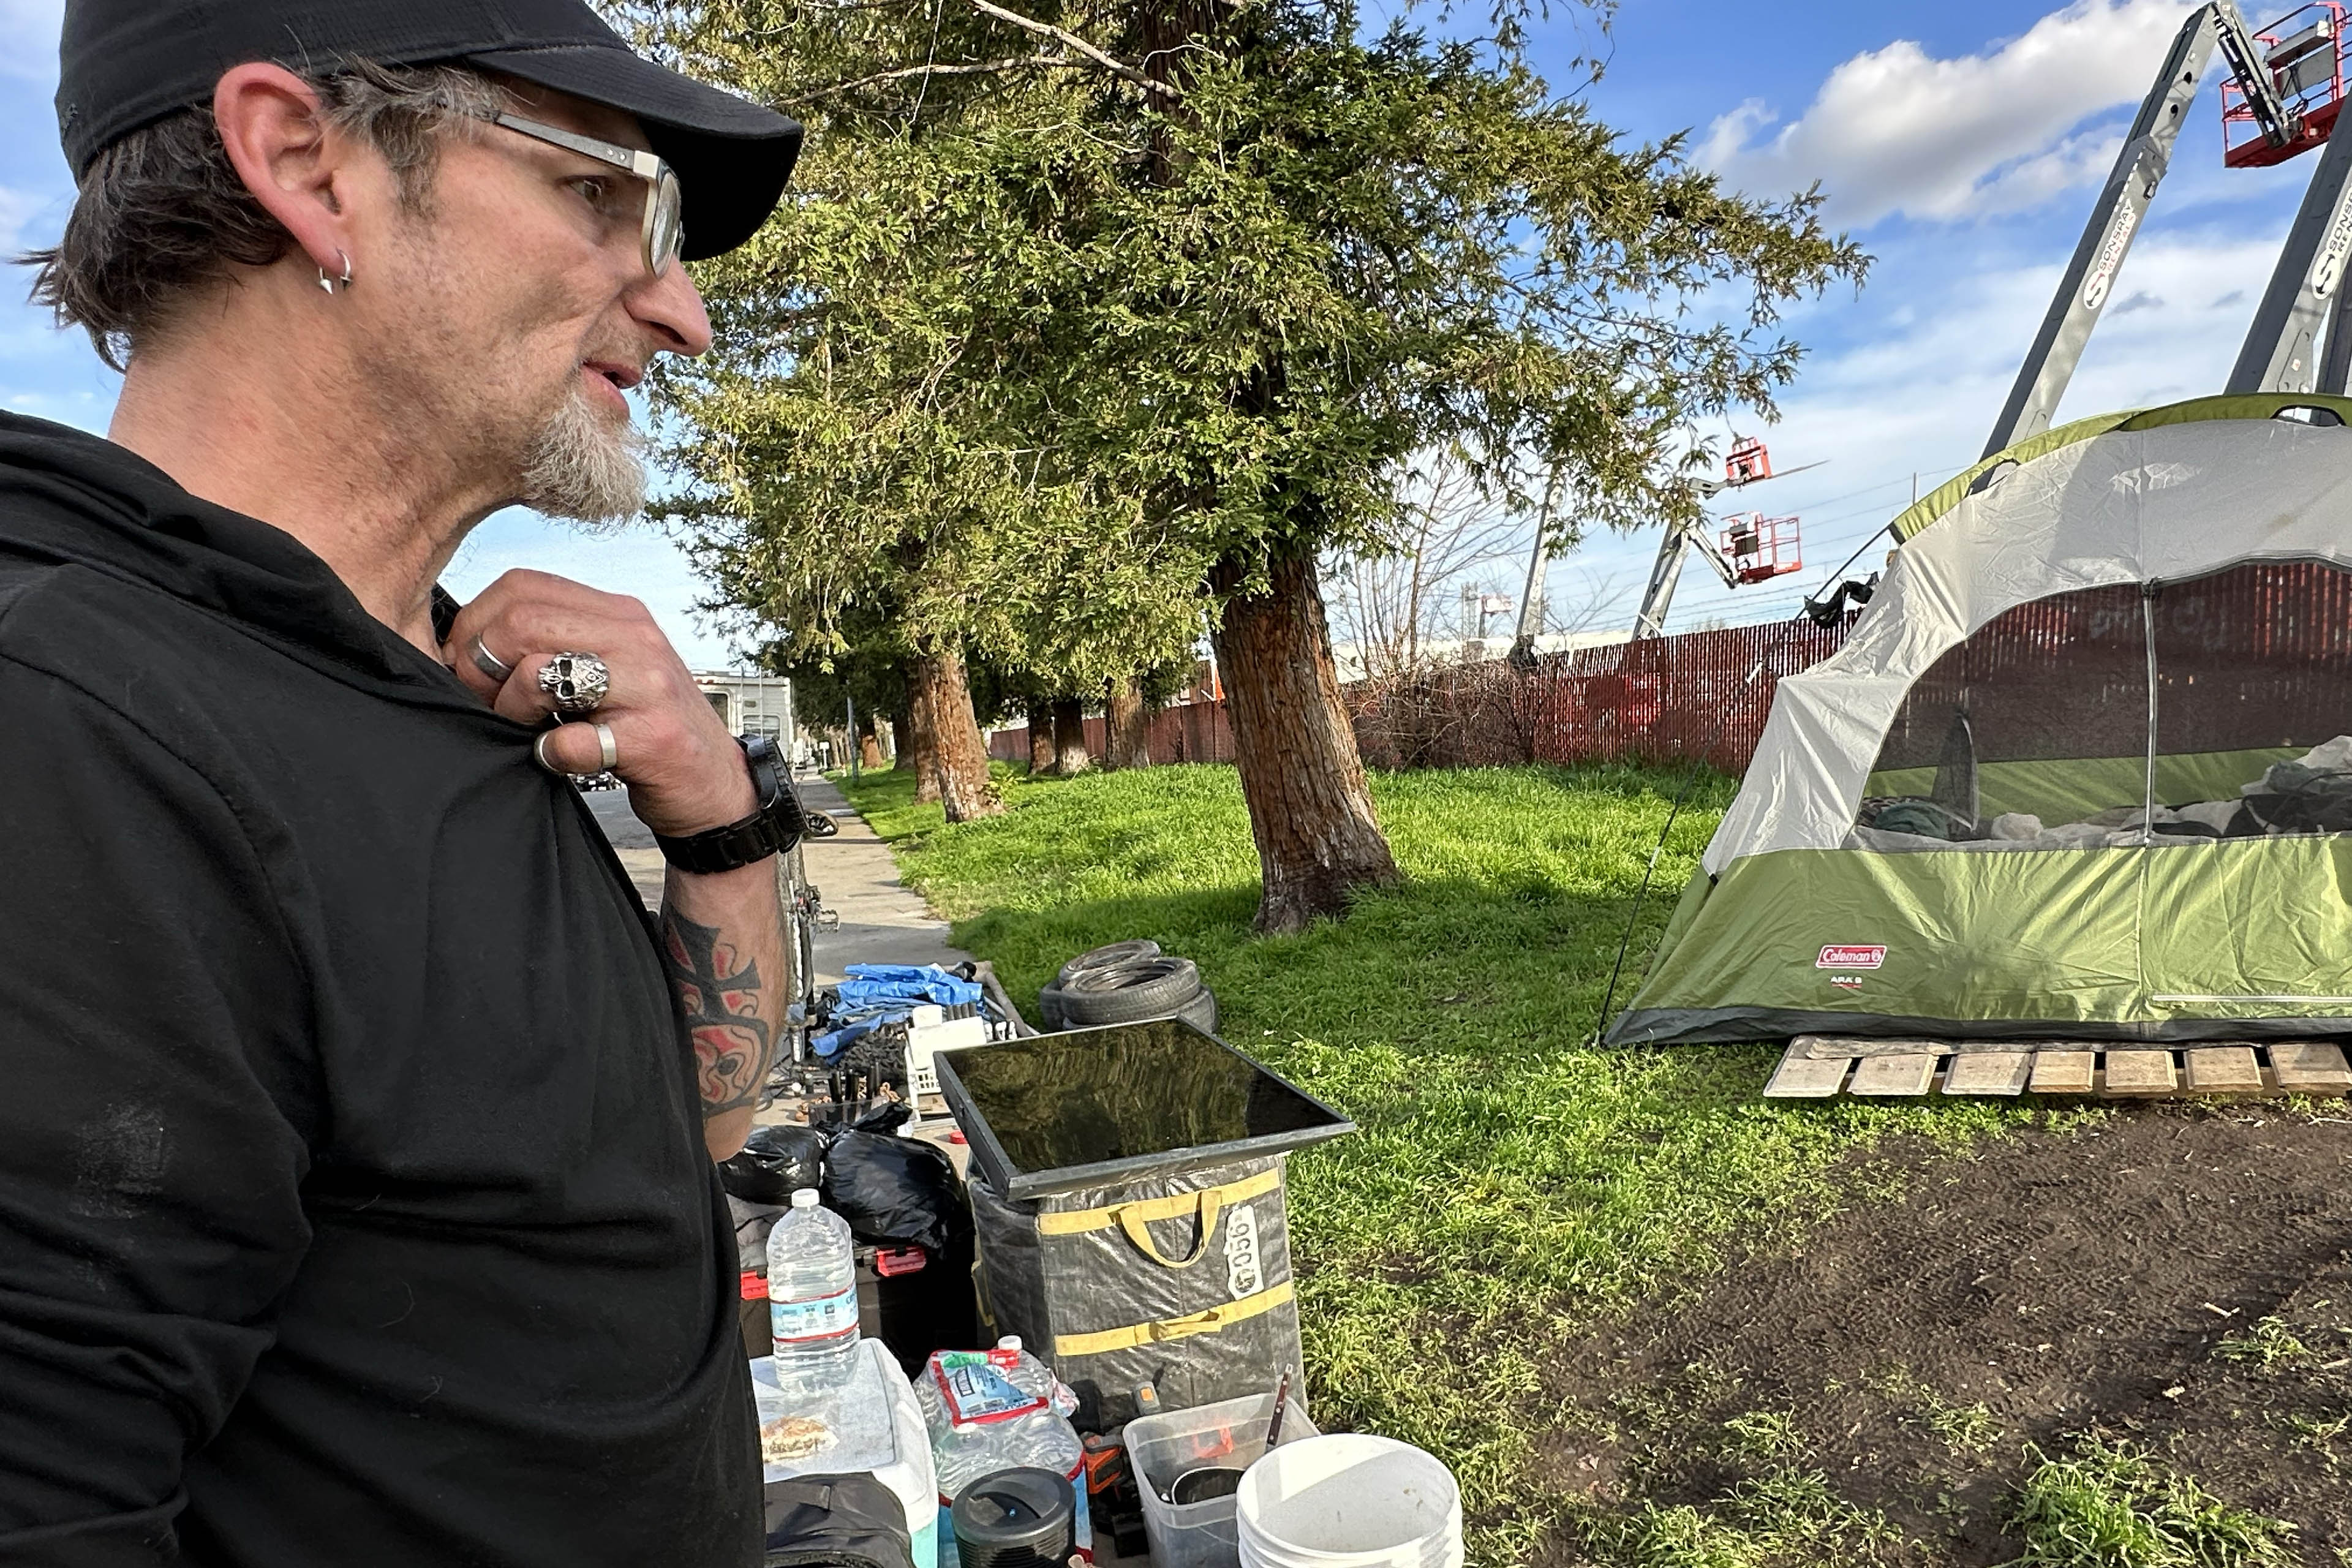 Samuel Buckles stands to the left of the image and looks at his encampment area as he prepares to leave the area. His tent and belongings are organized on the grass and sidewalk.